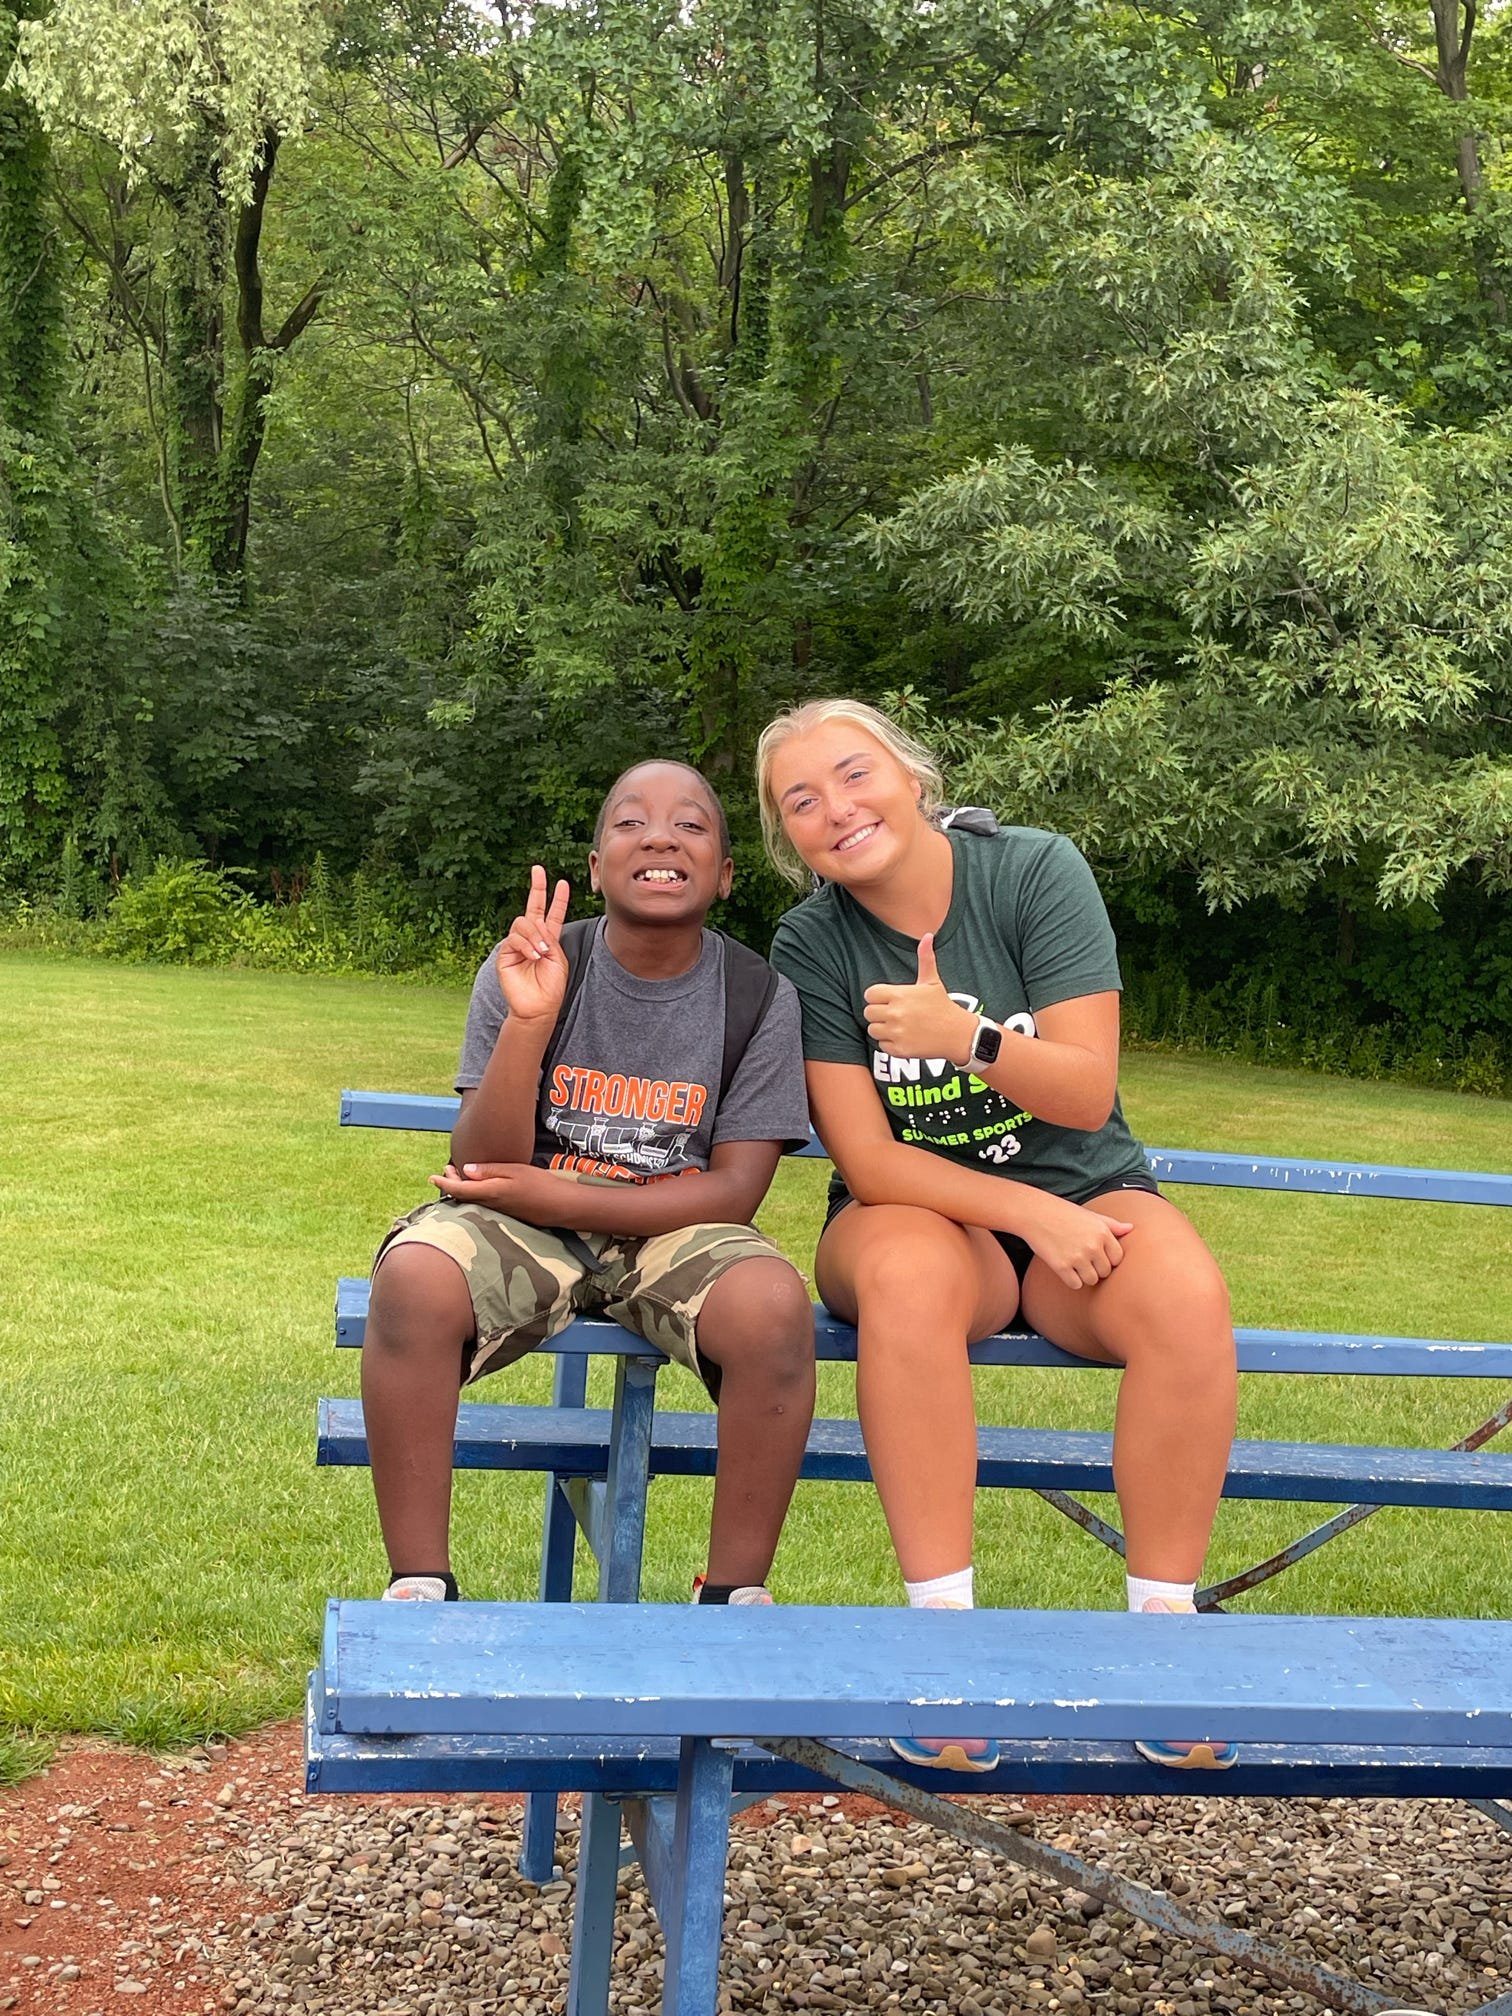  Darryn and Nikki sitting on the bench taking a break during camp 